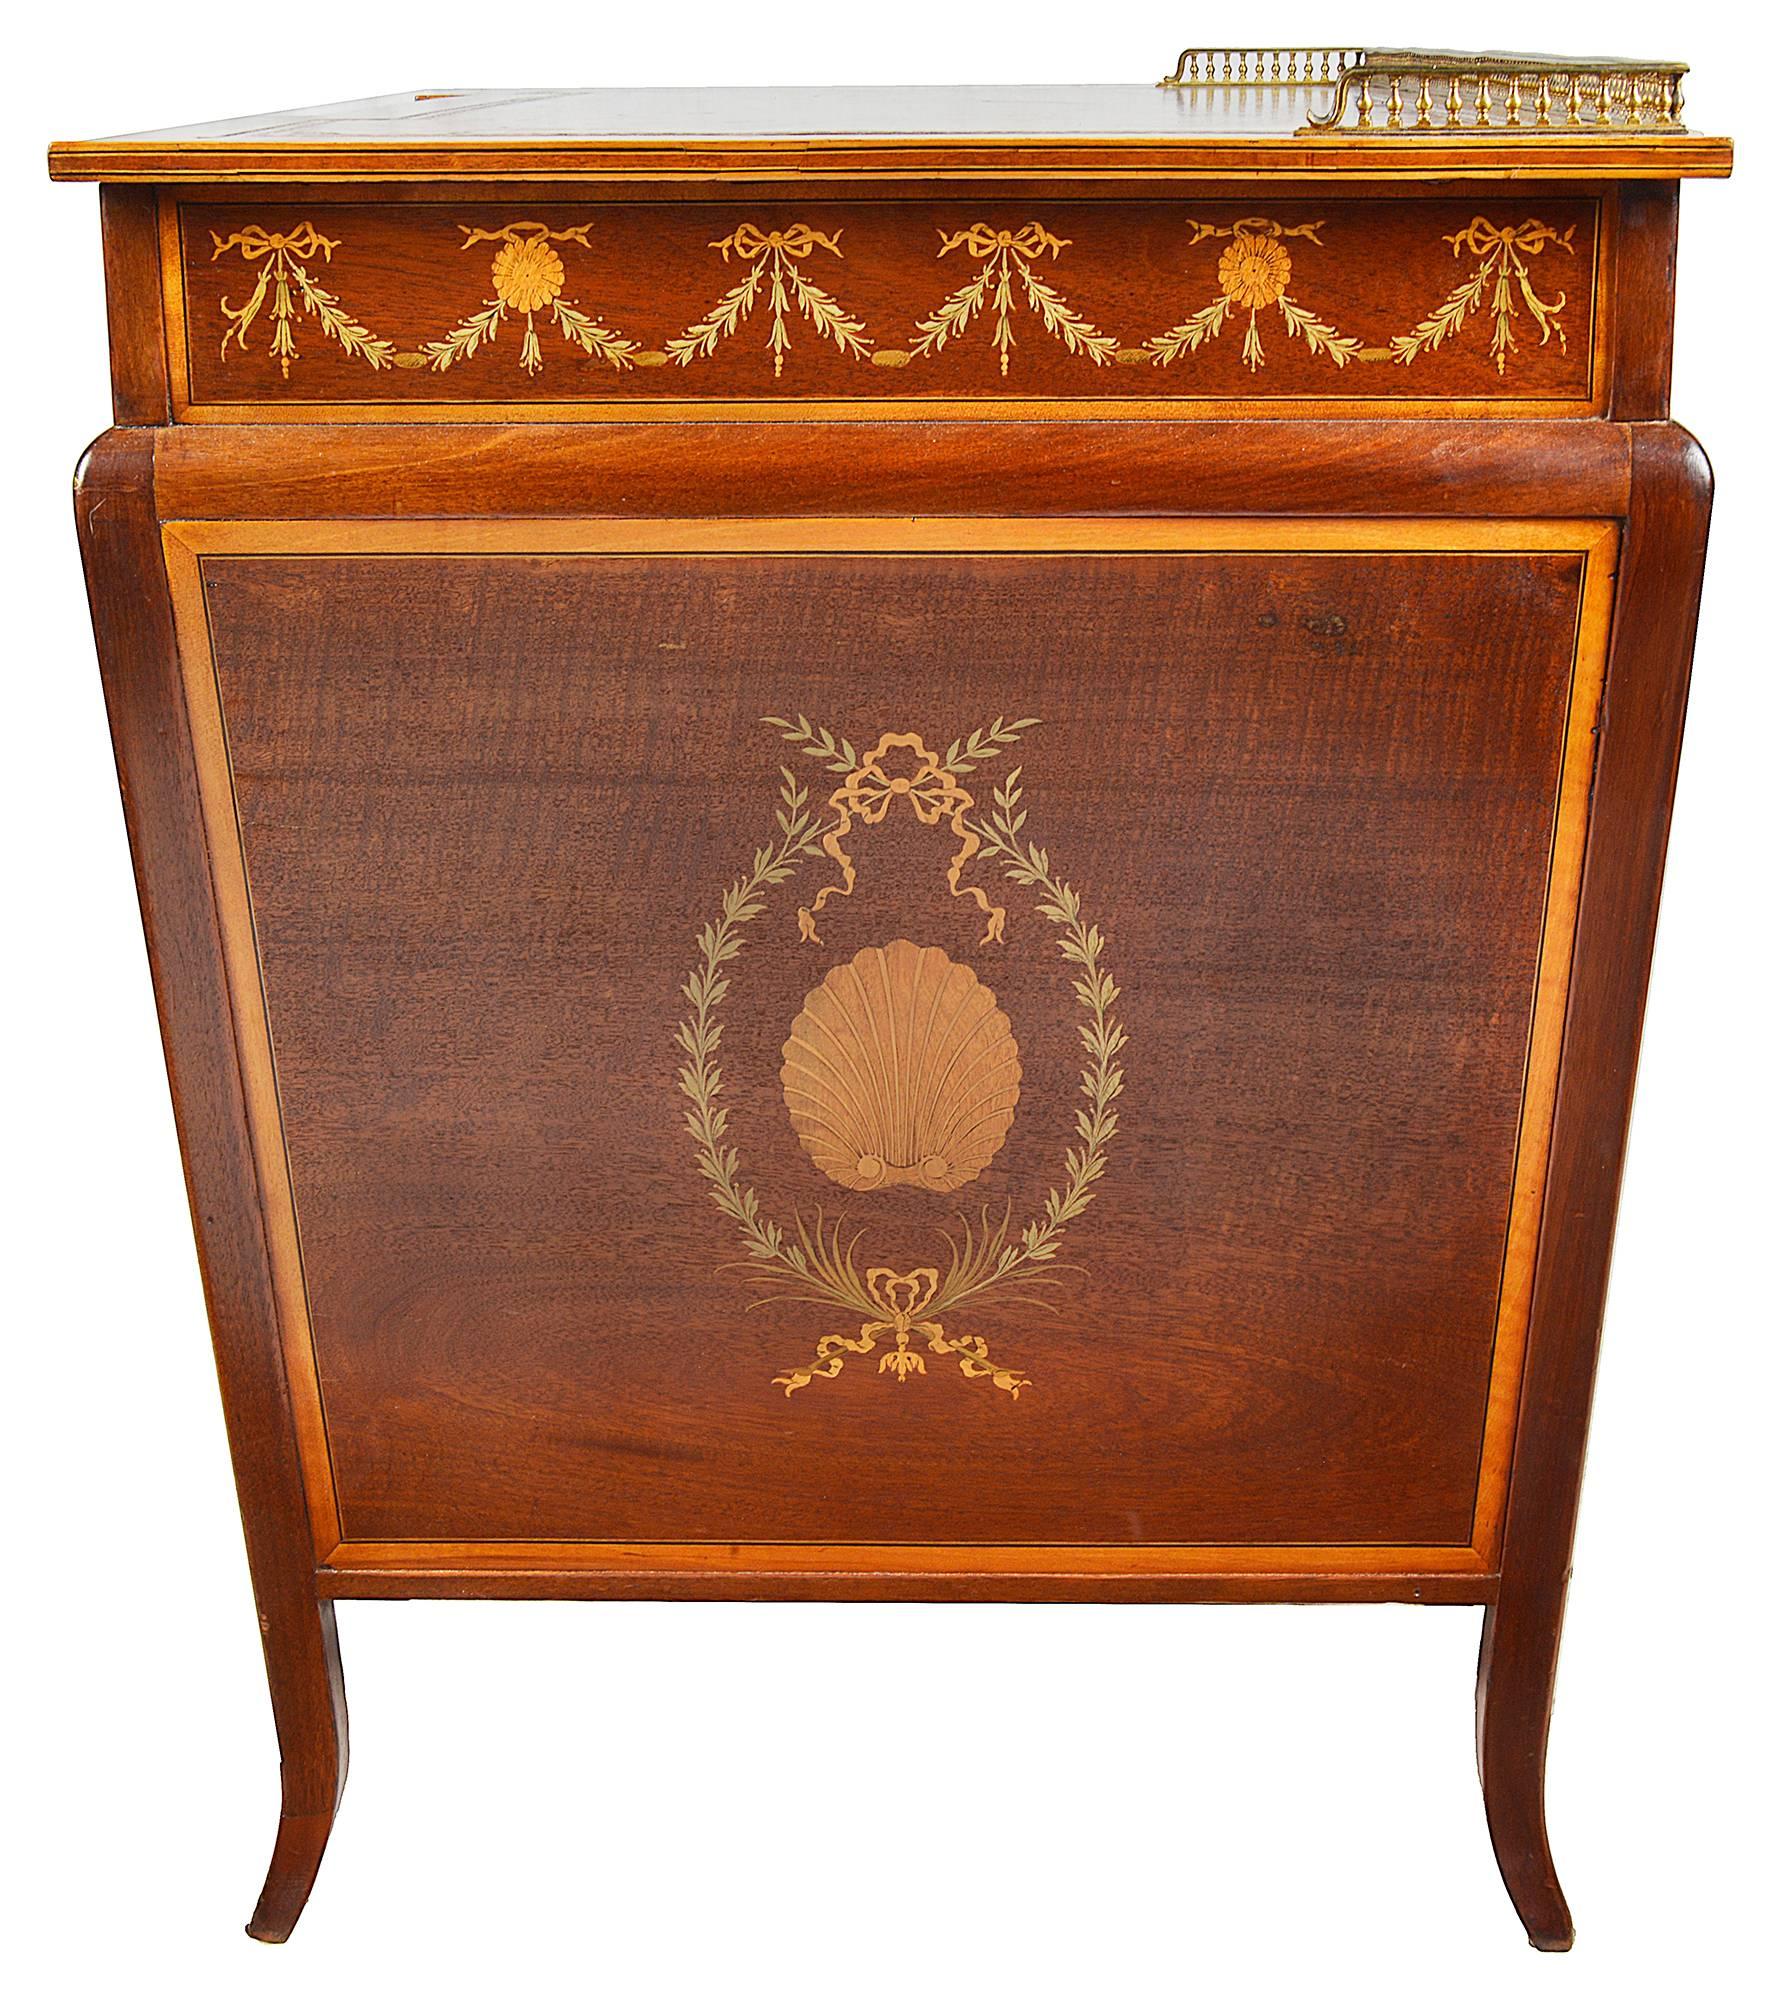 Inlay Sheraton Revival Inlaid Desk, 19th Century, Edwards and Roberts For Sale